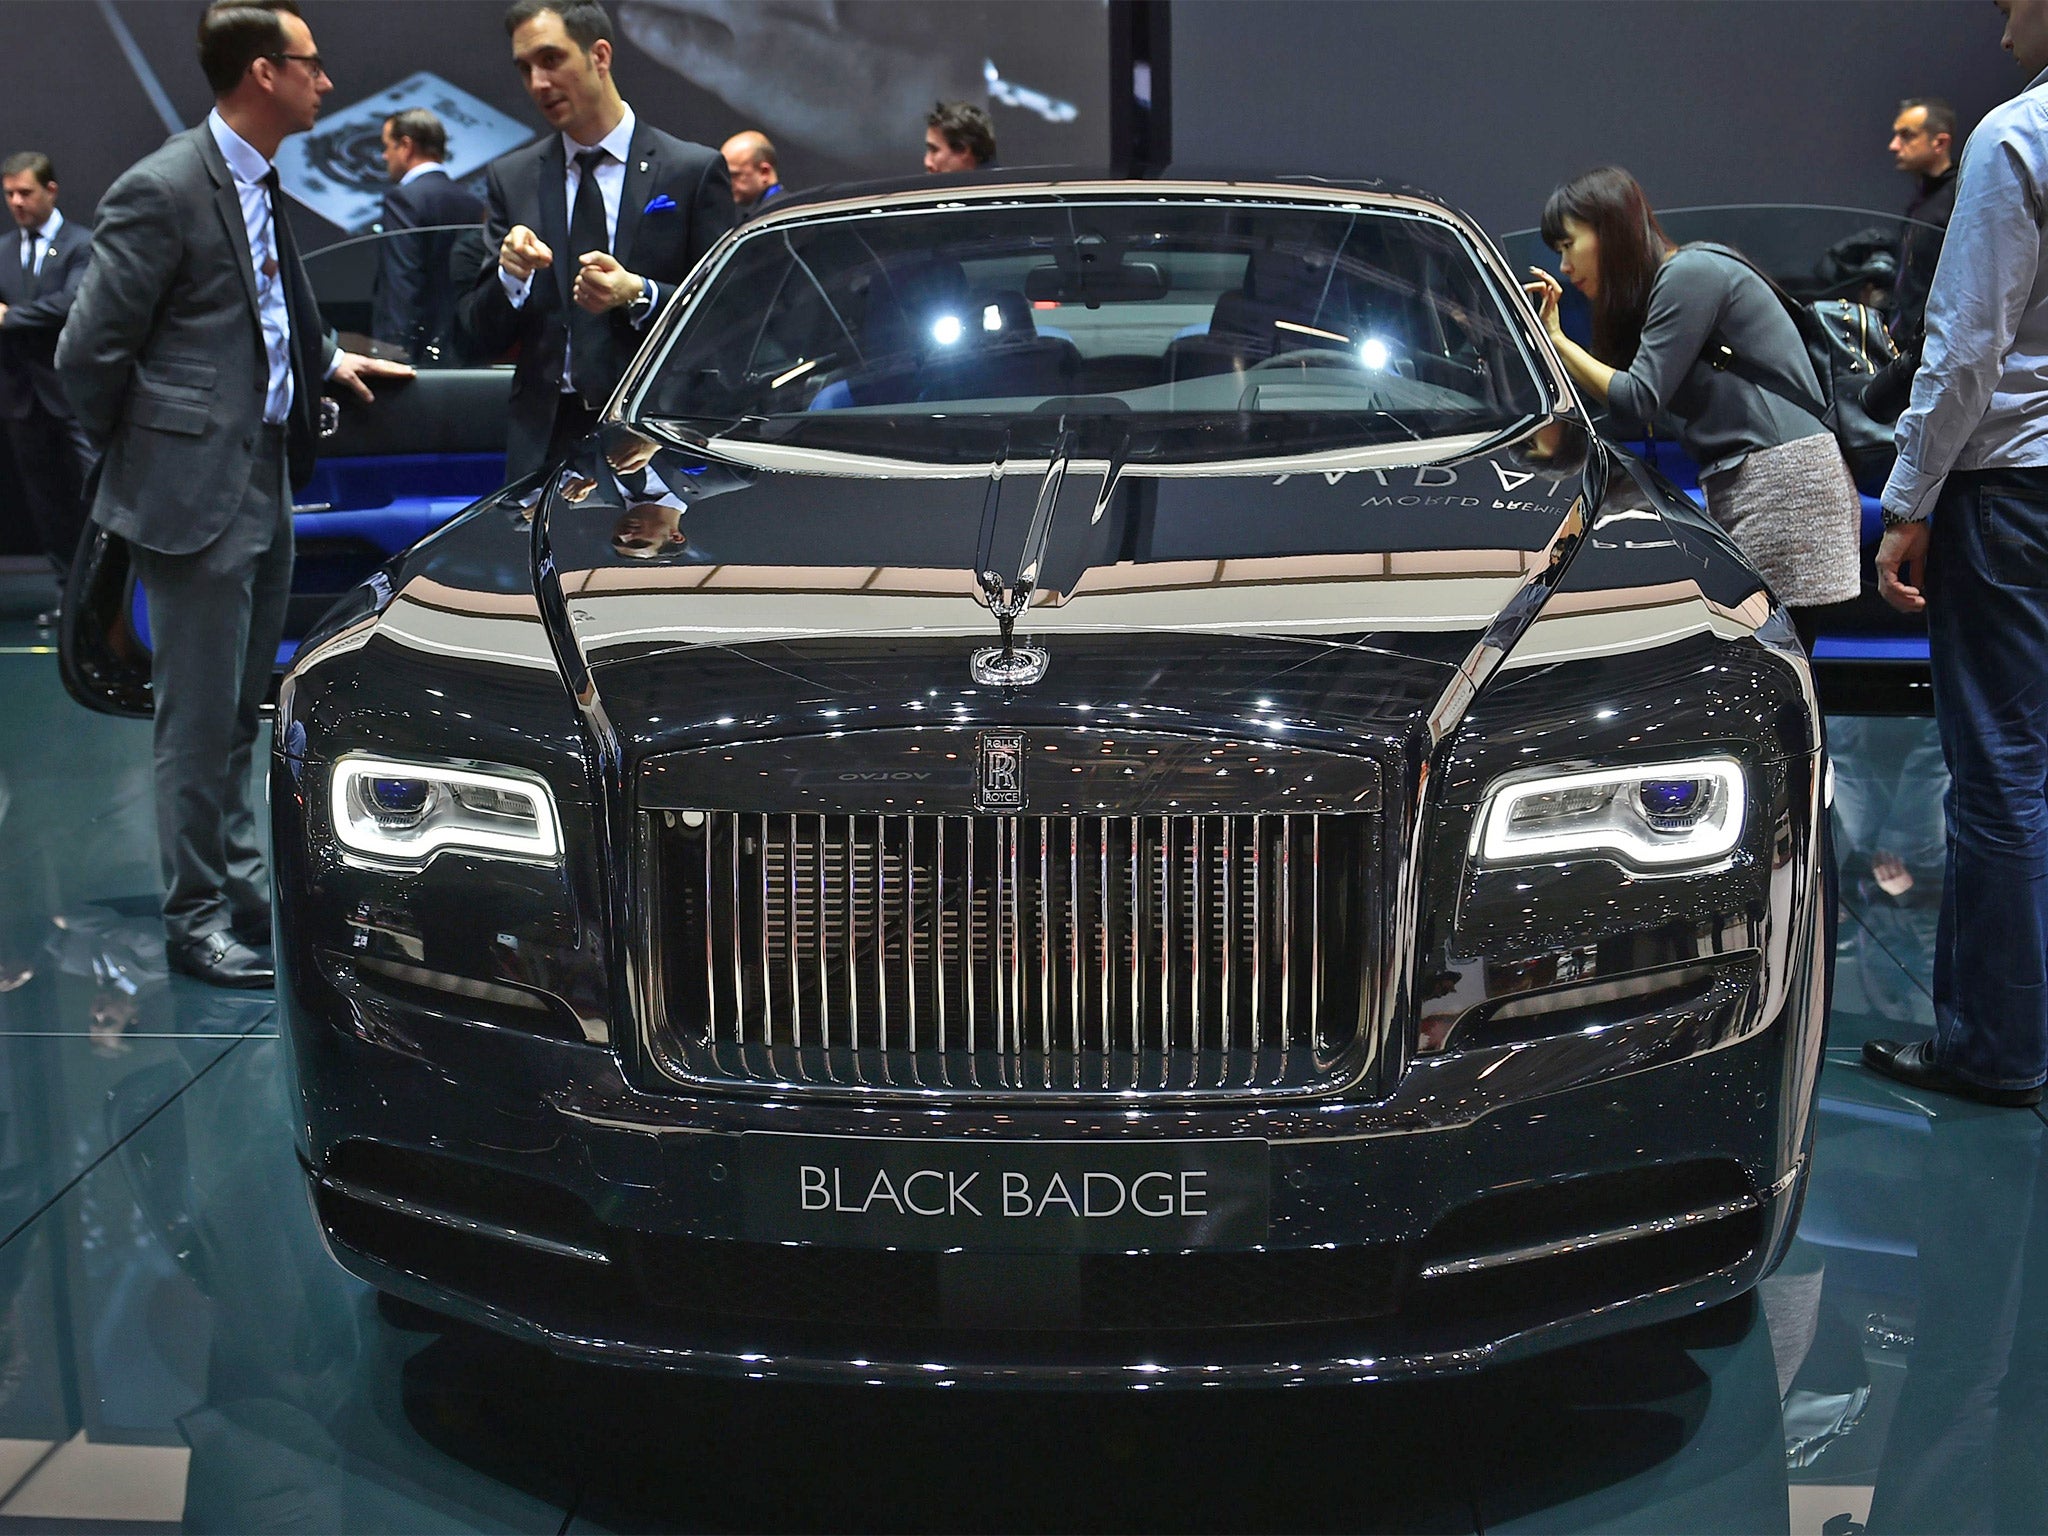 The new Rolls-Royce Wraith Black Badge car on display at the Geneva Motor Show on Wednesday